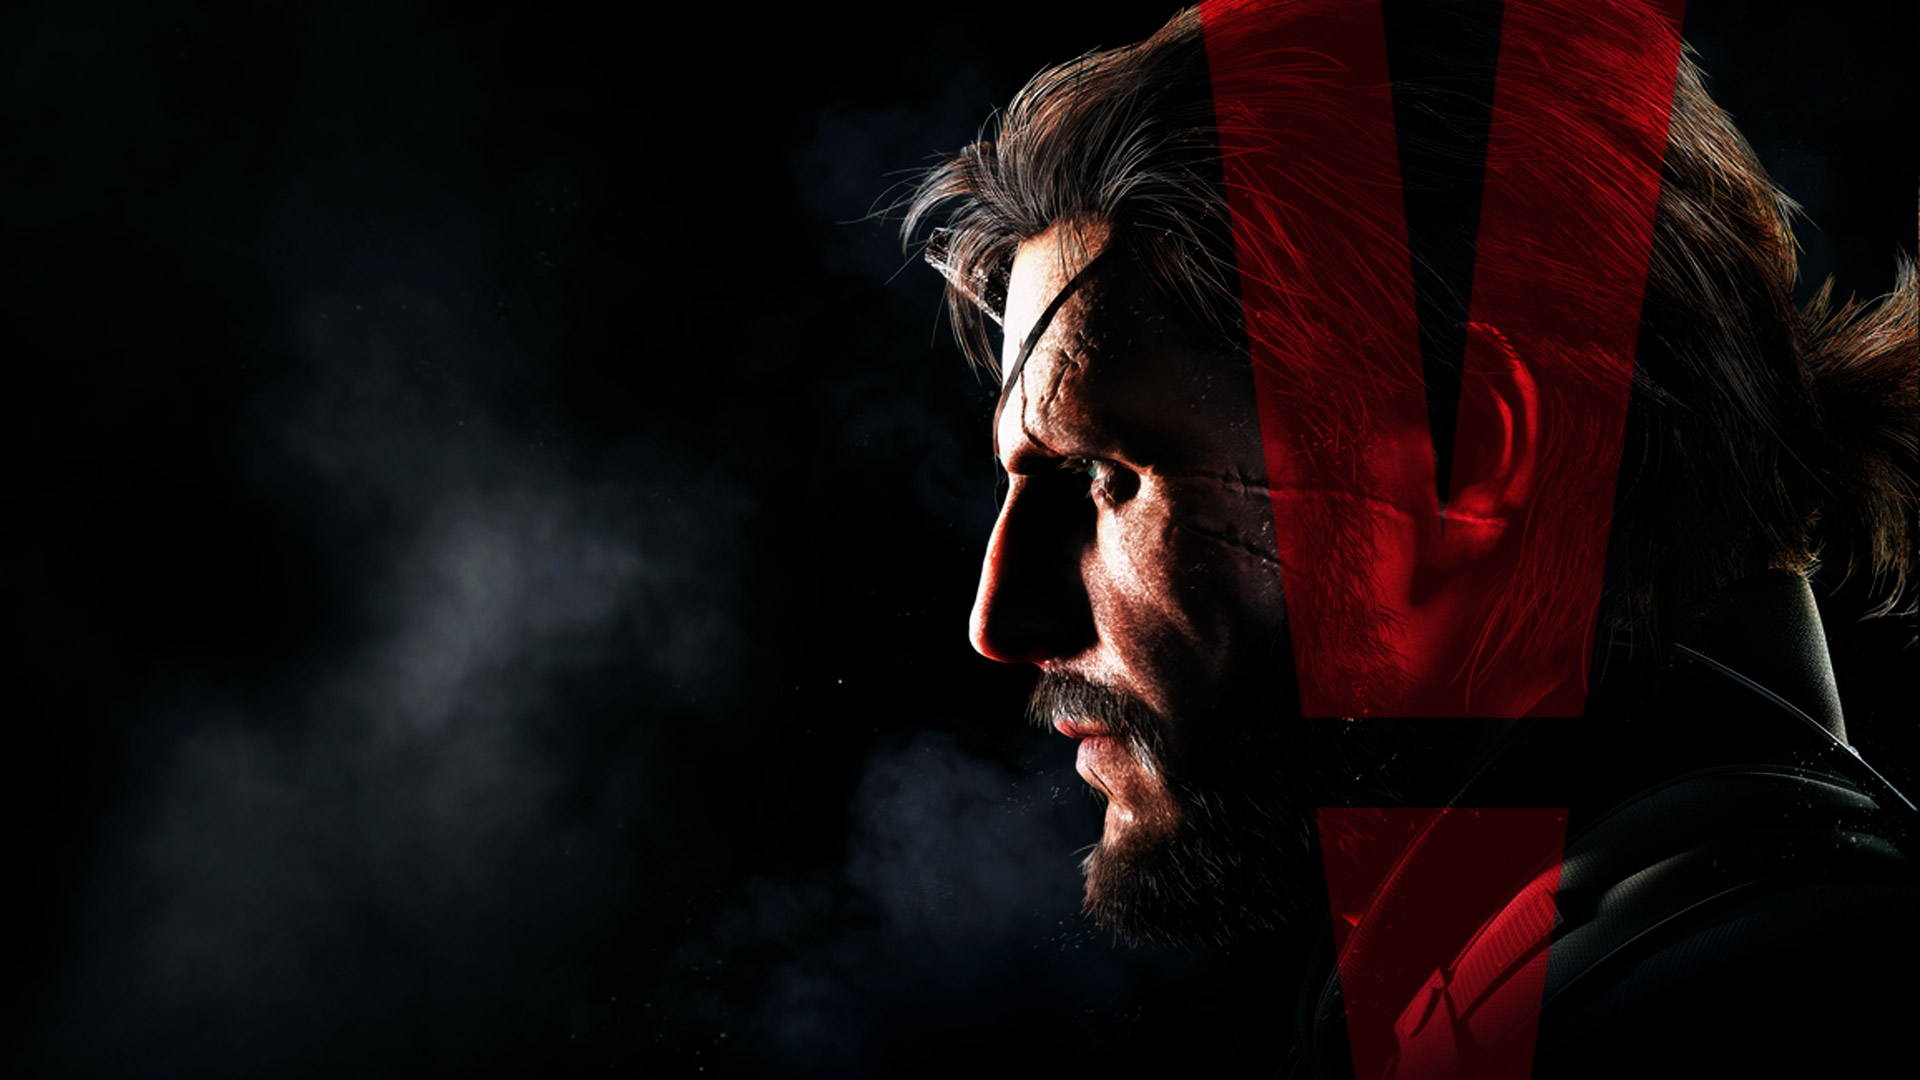 256 Metal Gear Solid HD Wallpapers Backgrounds - Wallpaper Abyss